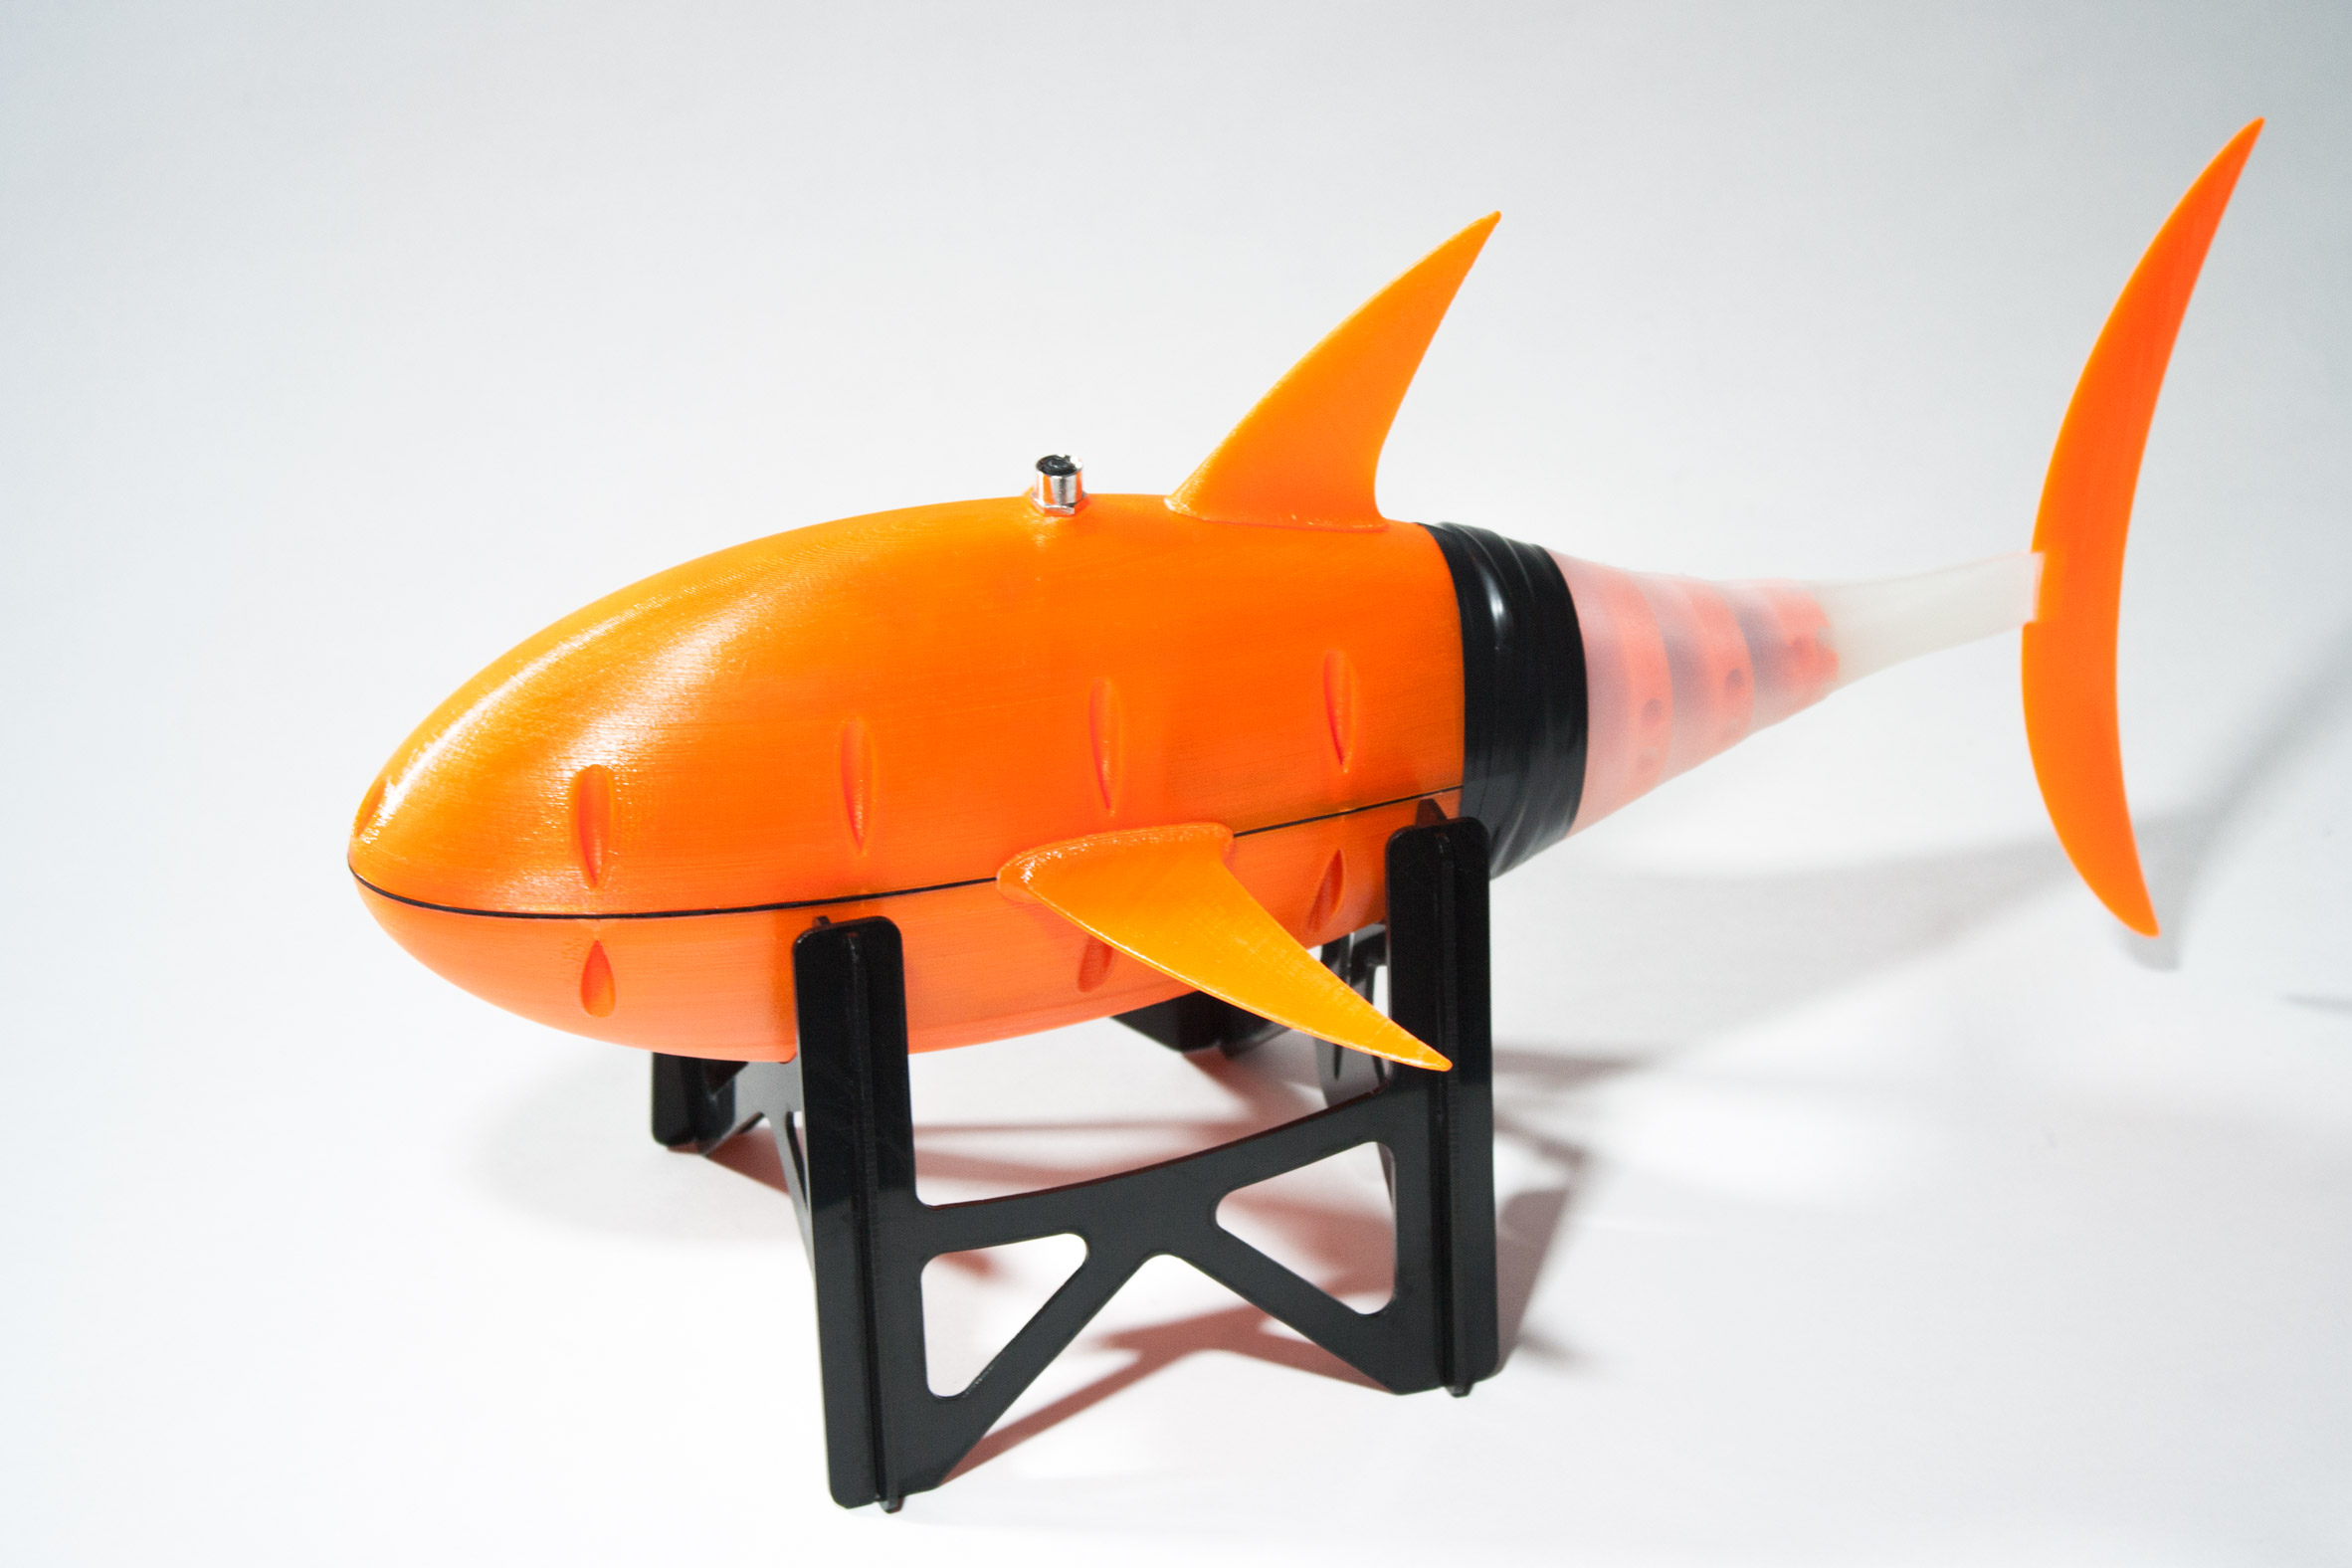 Robotic fish swims through water by mimicking the movement of a tuna